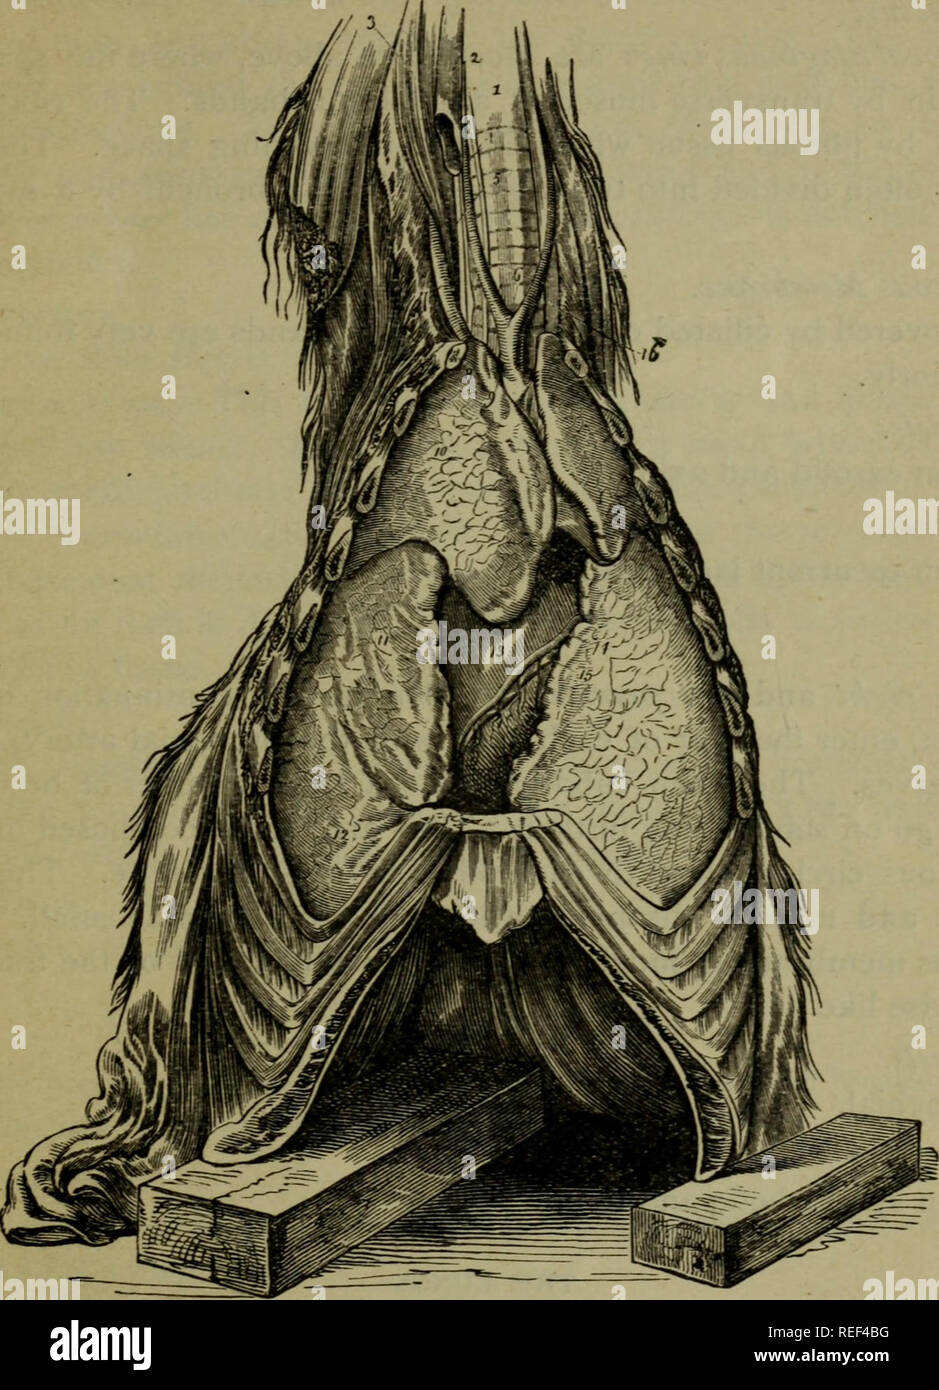 . A compend of equine anatomy and physiology. Horses. VISCERAL ANATOMY. *37 Fig. 23.. THE RESPIRATORY ORGANS; INFERIOR, OR FRONT VIEW. Trachea; 2, Jugular vein ; 3, Great rectus anticus muscle ; 4, Carotid artery ; 5, Longus colli muscle ; 6, Origin of the common carotids ; 7, Vertebral artery; 8, Section of first rib; 9, Cephalic trunk of right axillary artery; 10, Anterior lobe of right lung; 11, Middle, or supplementary lobe of ditto; 12, Posterior portion or lobe of ditto ; 13, Heart; 14, Cardiac artery; 15, Ventricular branch of cardiac vein; 16, OZsoph- agus. IO. Please note that these i Stock Photo